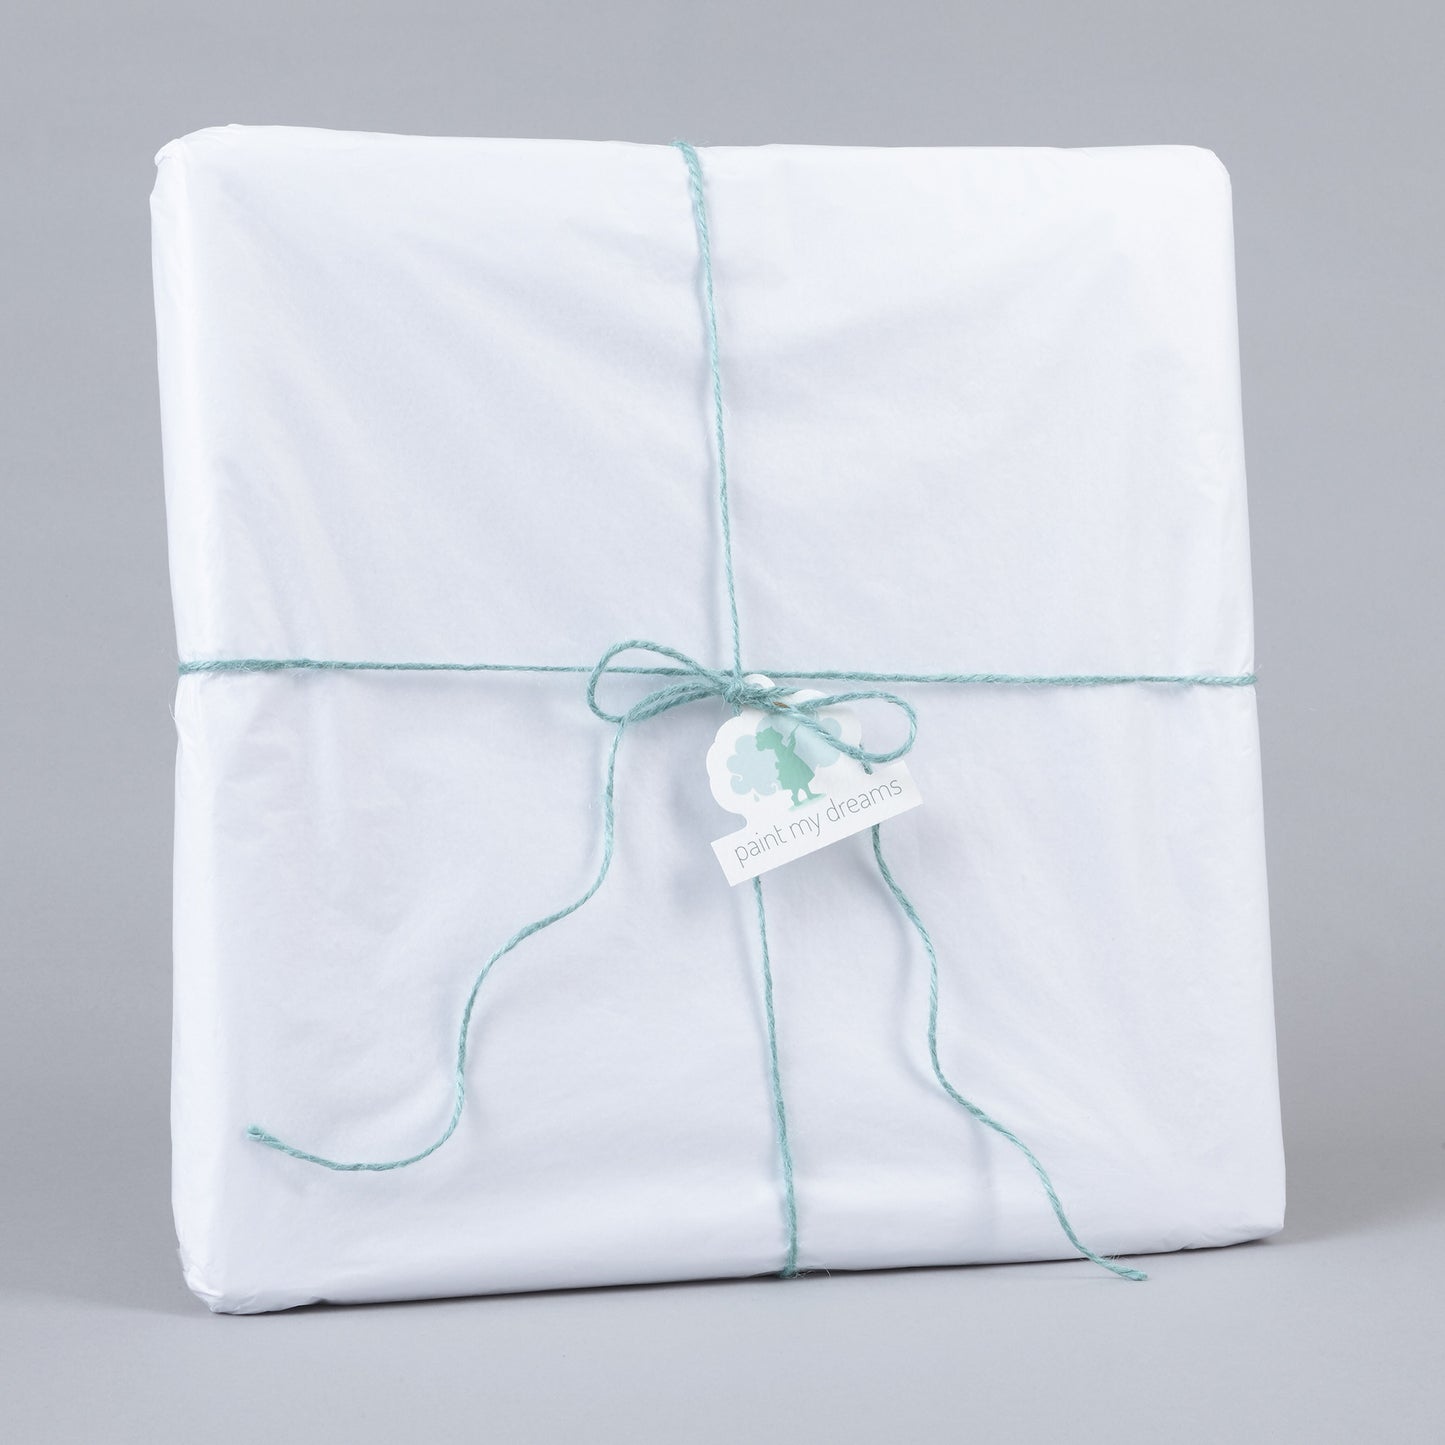 Gift wrapped for New baby, Christening, baby shower, birthday